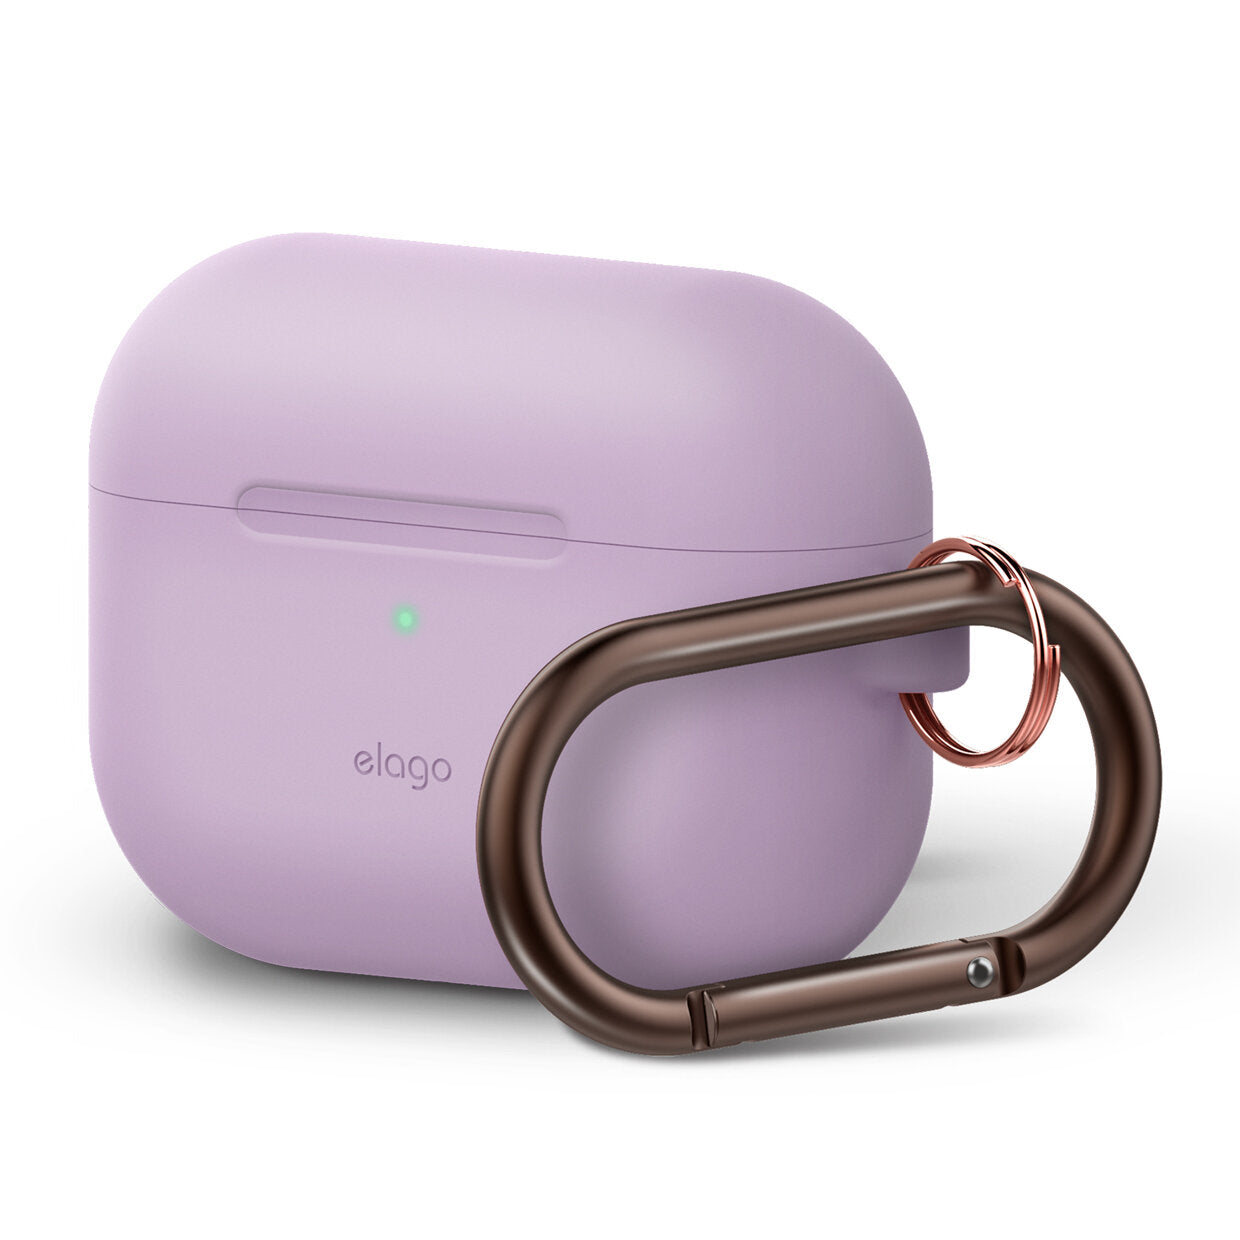 Original Hang Case for AirPods Pro [12 Colors]